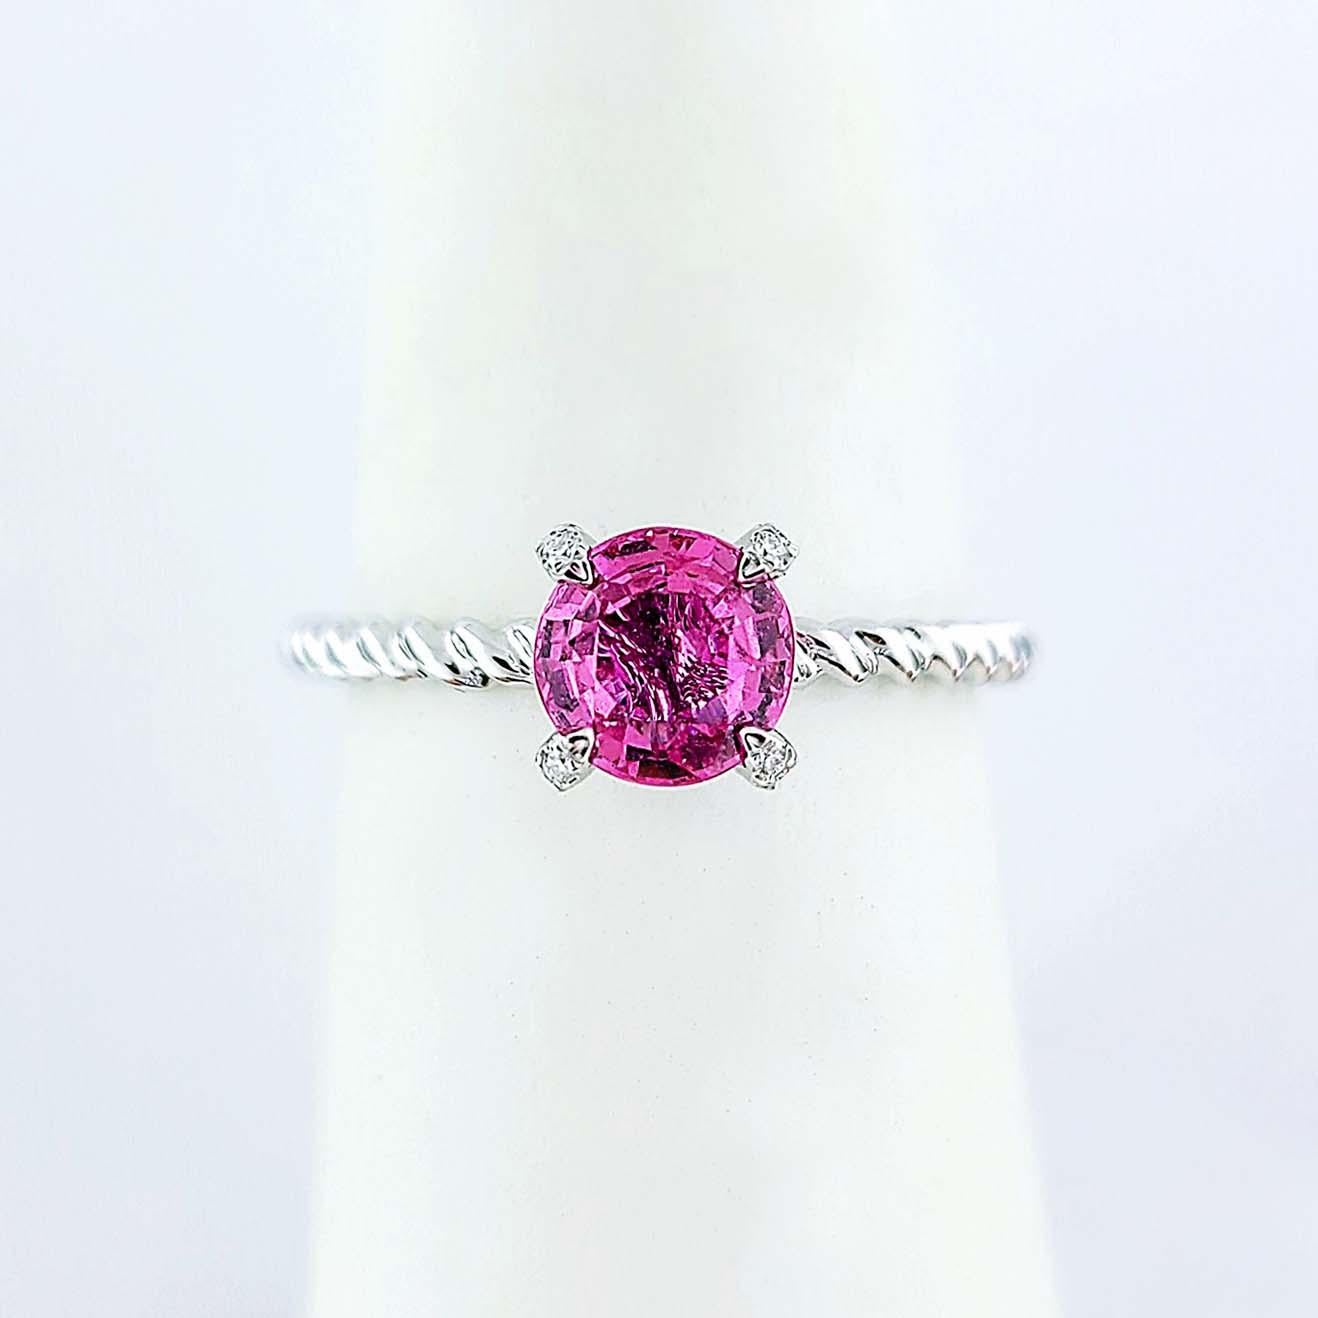 Produced by award winning Italian designer Stefano Vitolo. Stefano creates custom artisanal one of a kind jewelry with excellent gemstones in a truly old world Italian craftmanship.
This handcrafted ring has 0.94 carat pink sapphire and melee